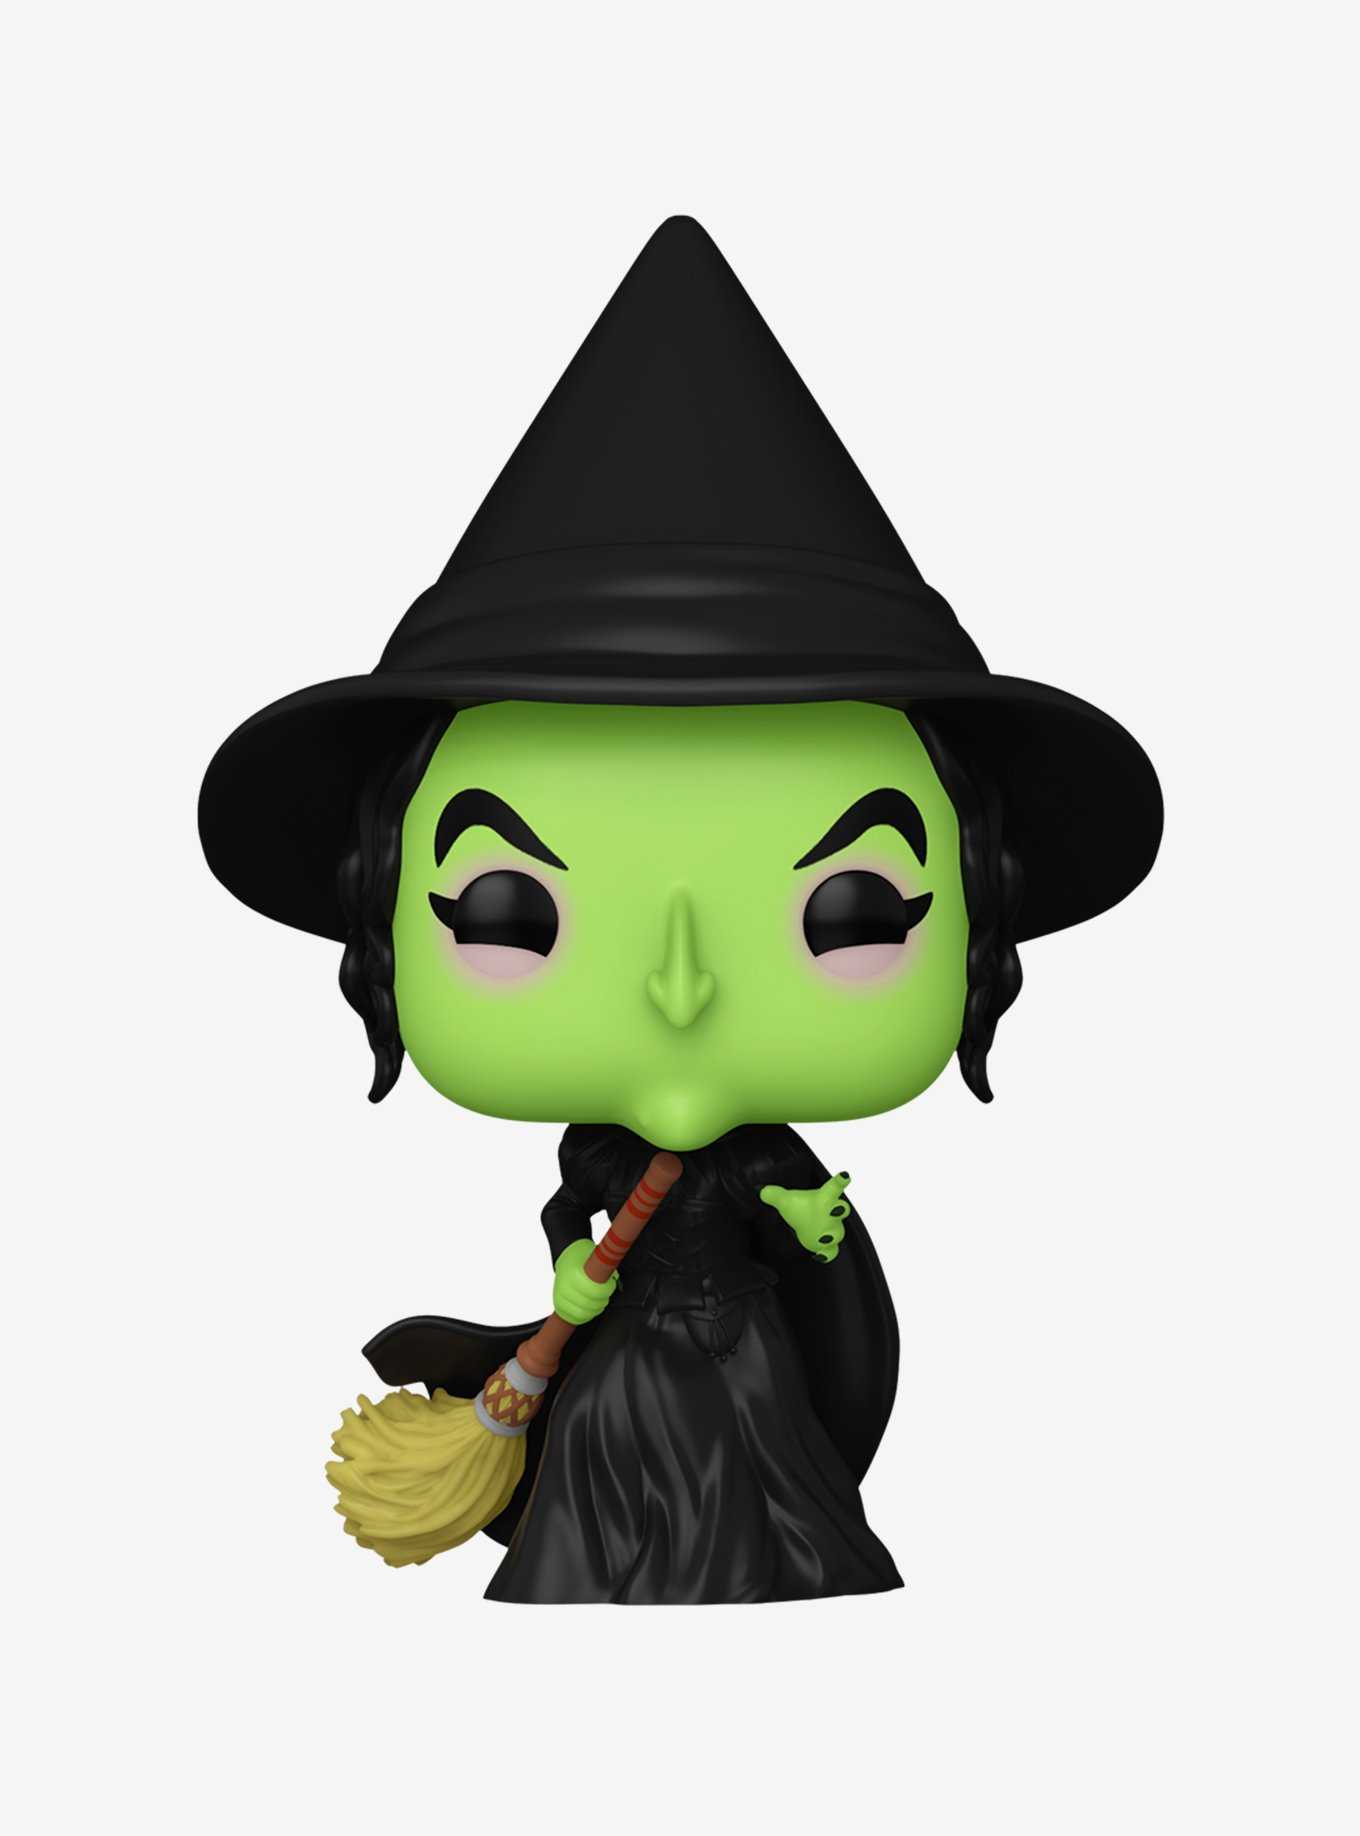 Funko Pop! Movies The Wizard of Oz 85th Anniversary Wicked Witch Vinyl Figure, , hi-res